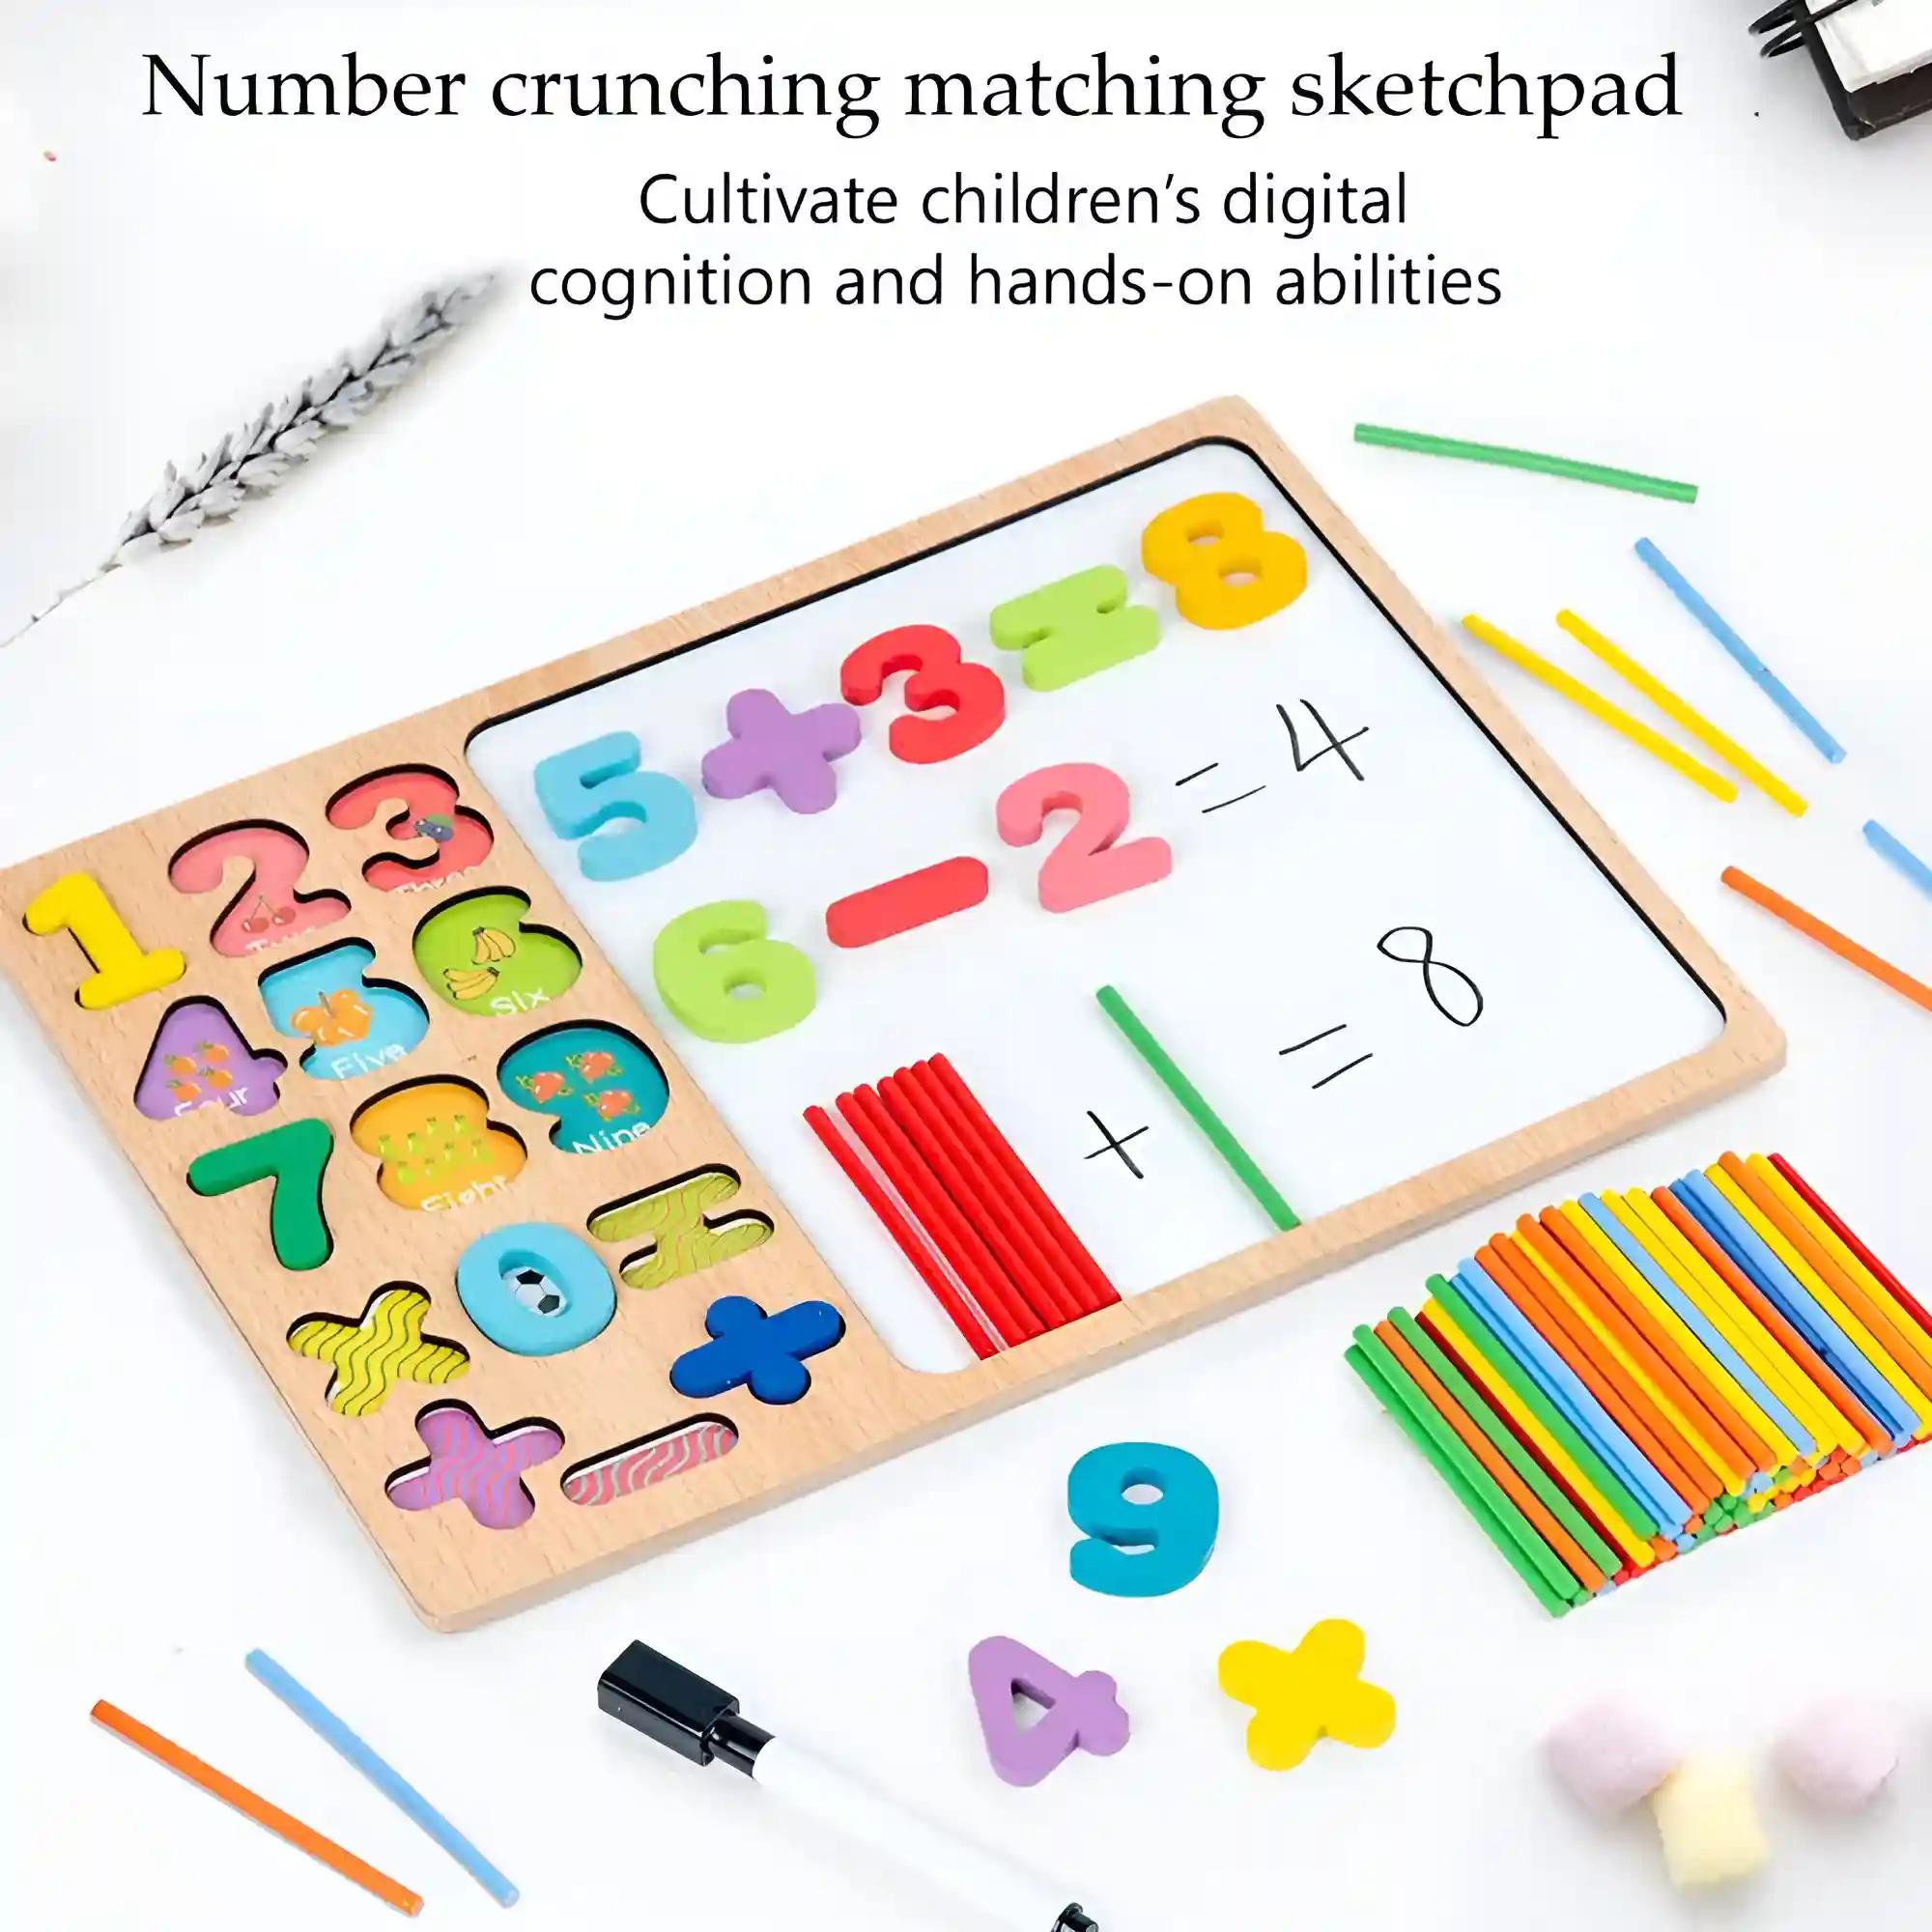 Numeric 1234 3D Puzzles Toys For Kids & Toddlers Educational & Mathematical Equations Tool Developing Mind Gaming Skill Abilities Wooden 1 To 9 & 0 White Surface Drawing Board (Pack Of 1)